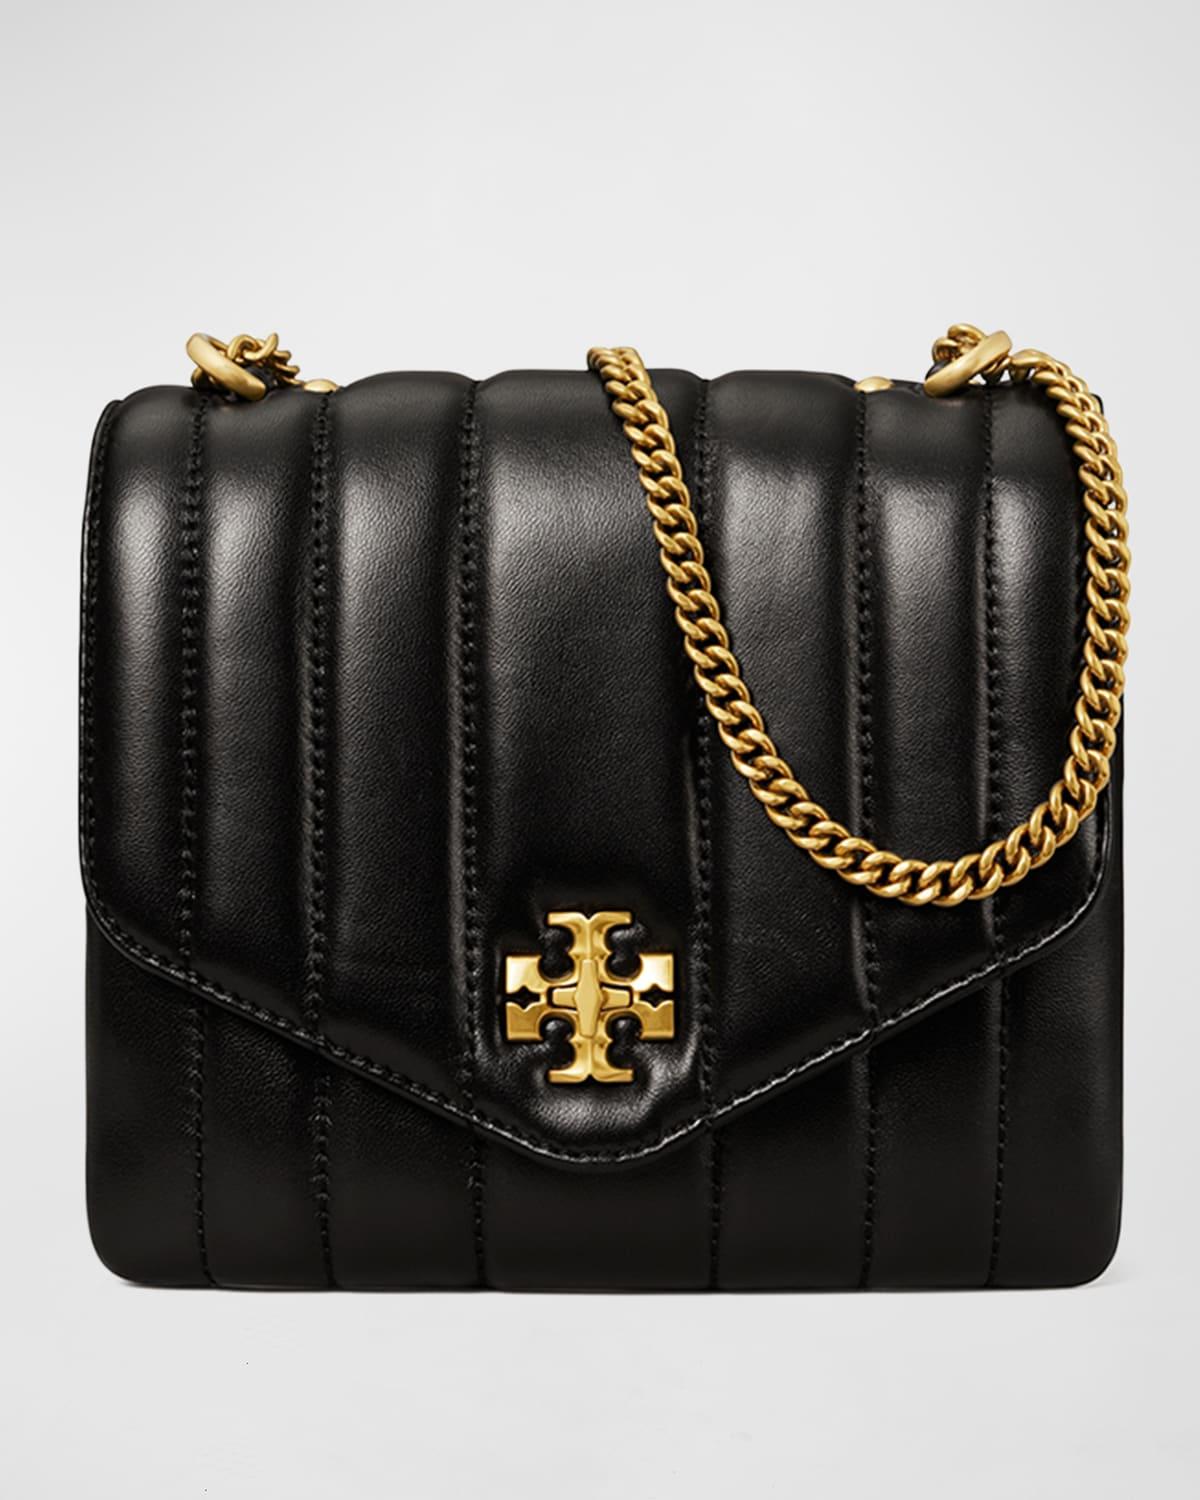 Tory Burch Kira Quilted Lambskin Square Crossbody Bag in Black | Lyst